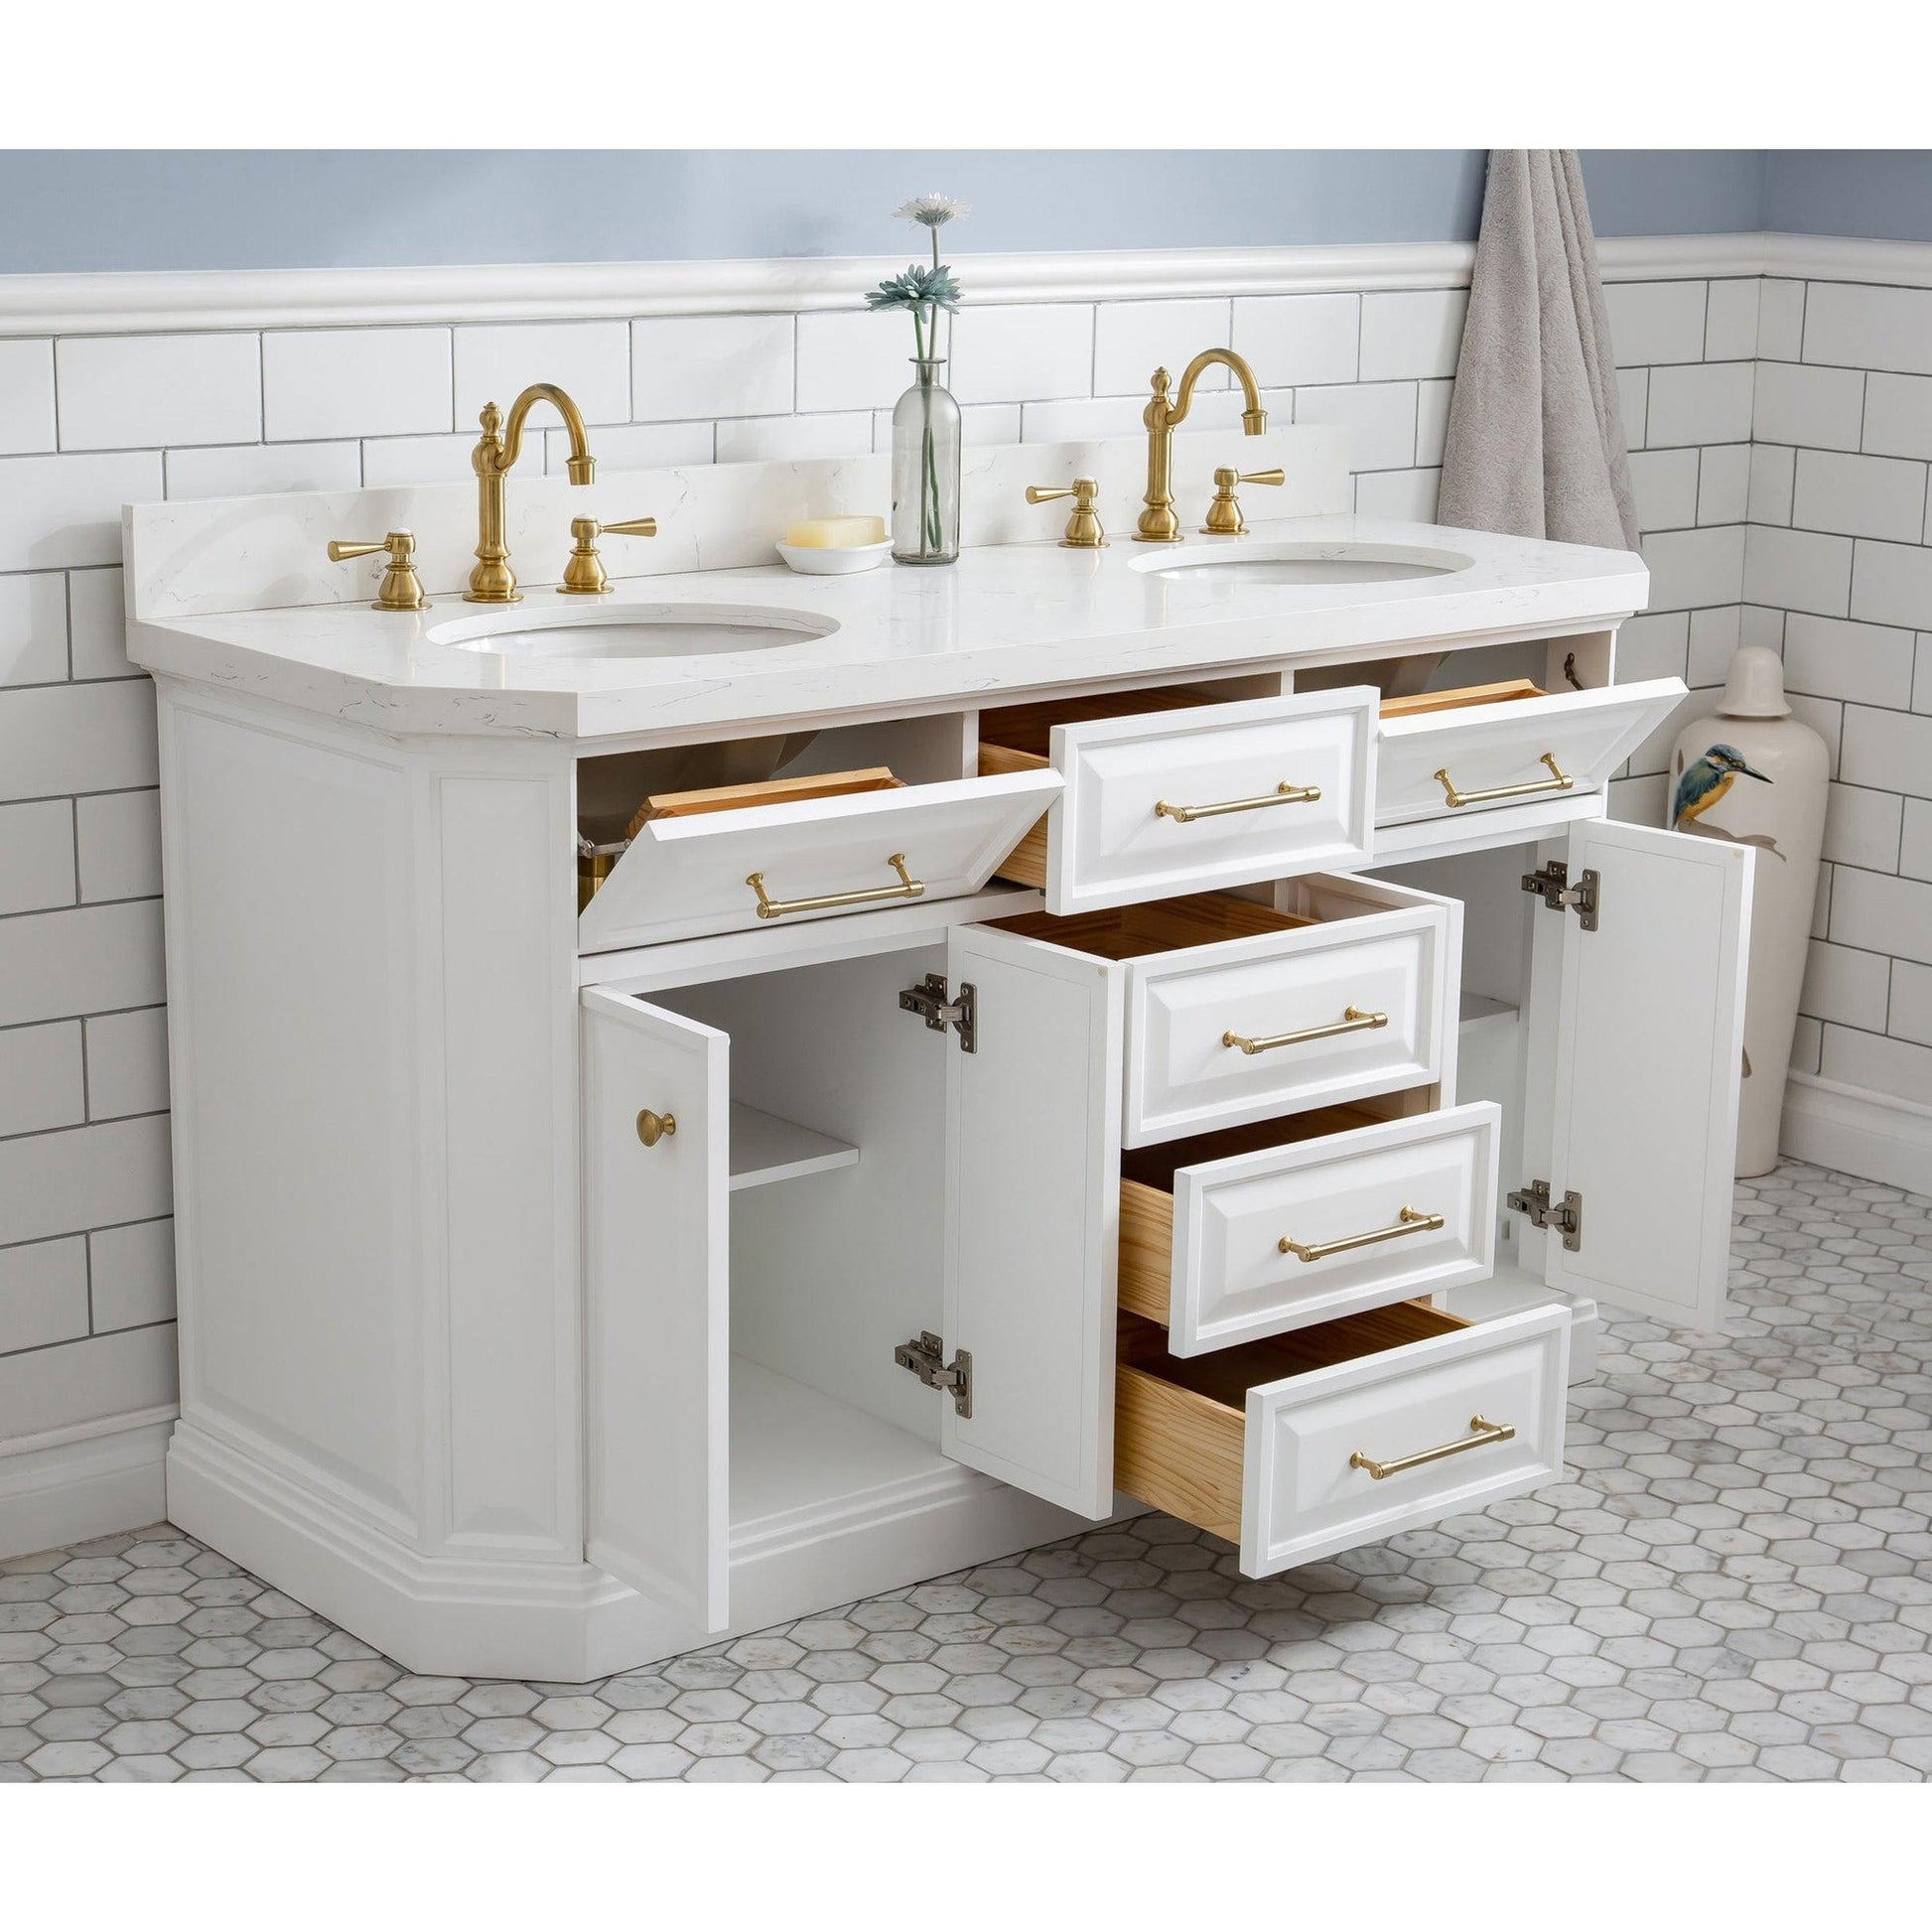 Water Creation Palace 60" Quartz Carrara Pure White Bathroom Vanity Set With Hardware in Satin Gold Finish And Only Mirrors in Chrome Finish